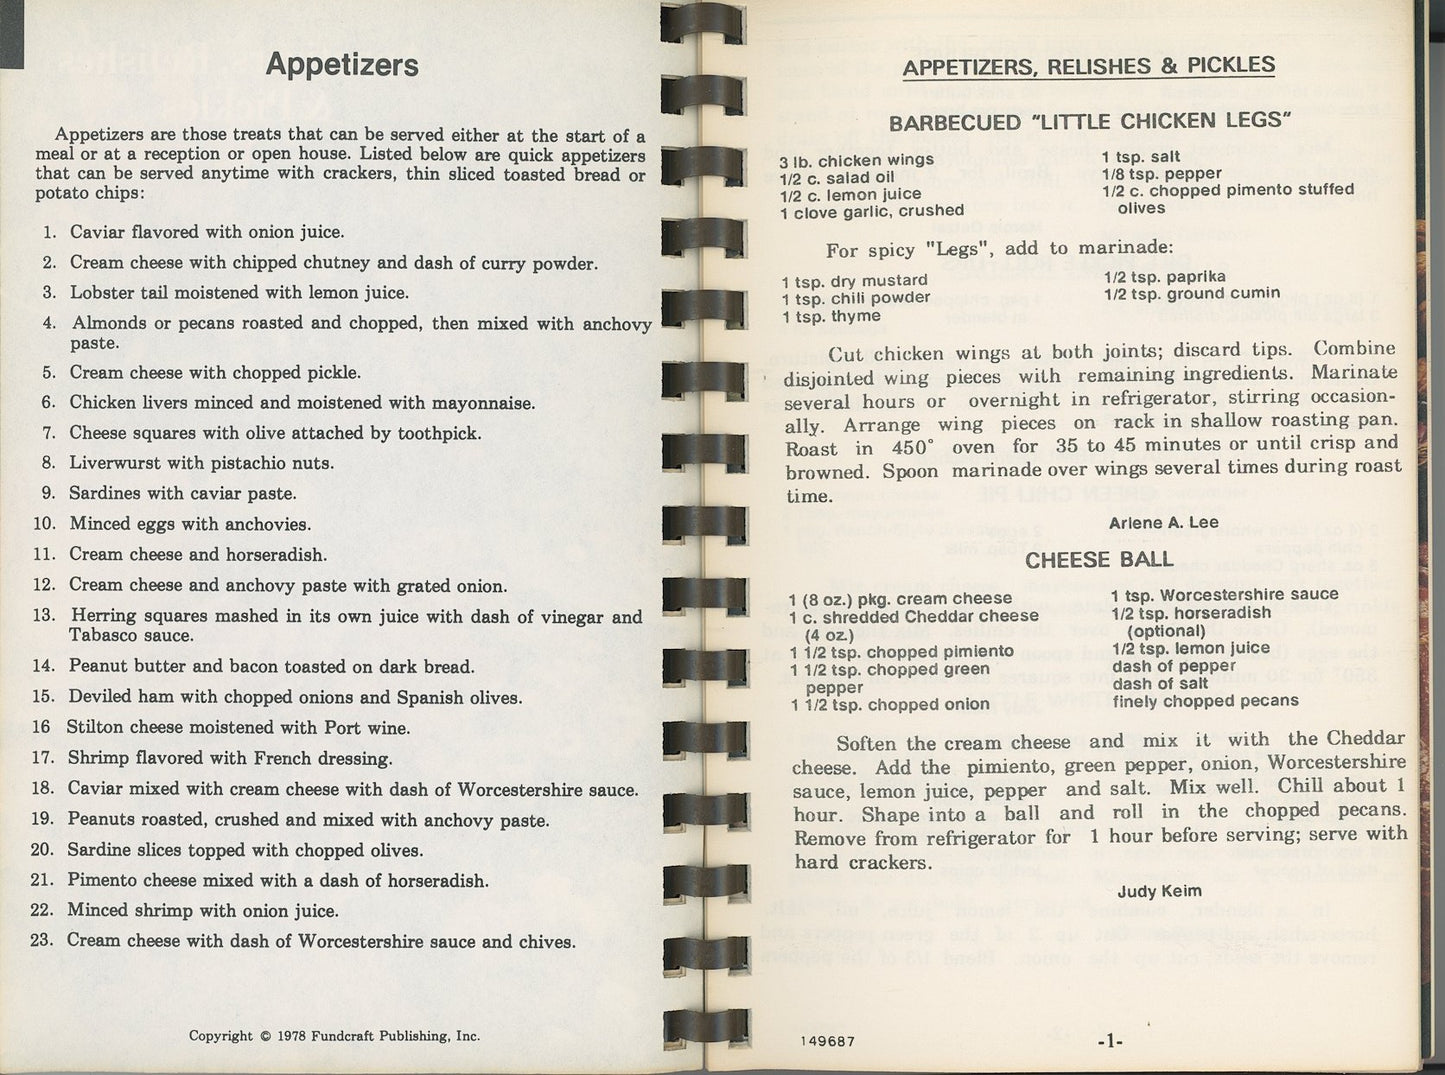 CORNUCOPIA, A Collection of Recipes | Winton Forest Church, Forest Park Ohio | Copyright 1978